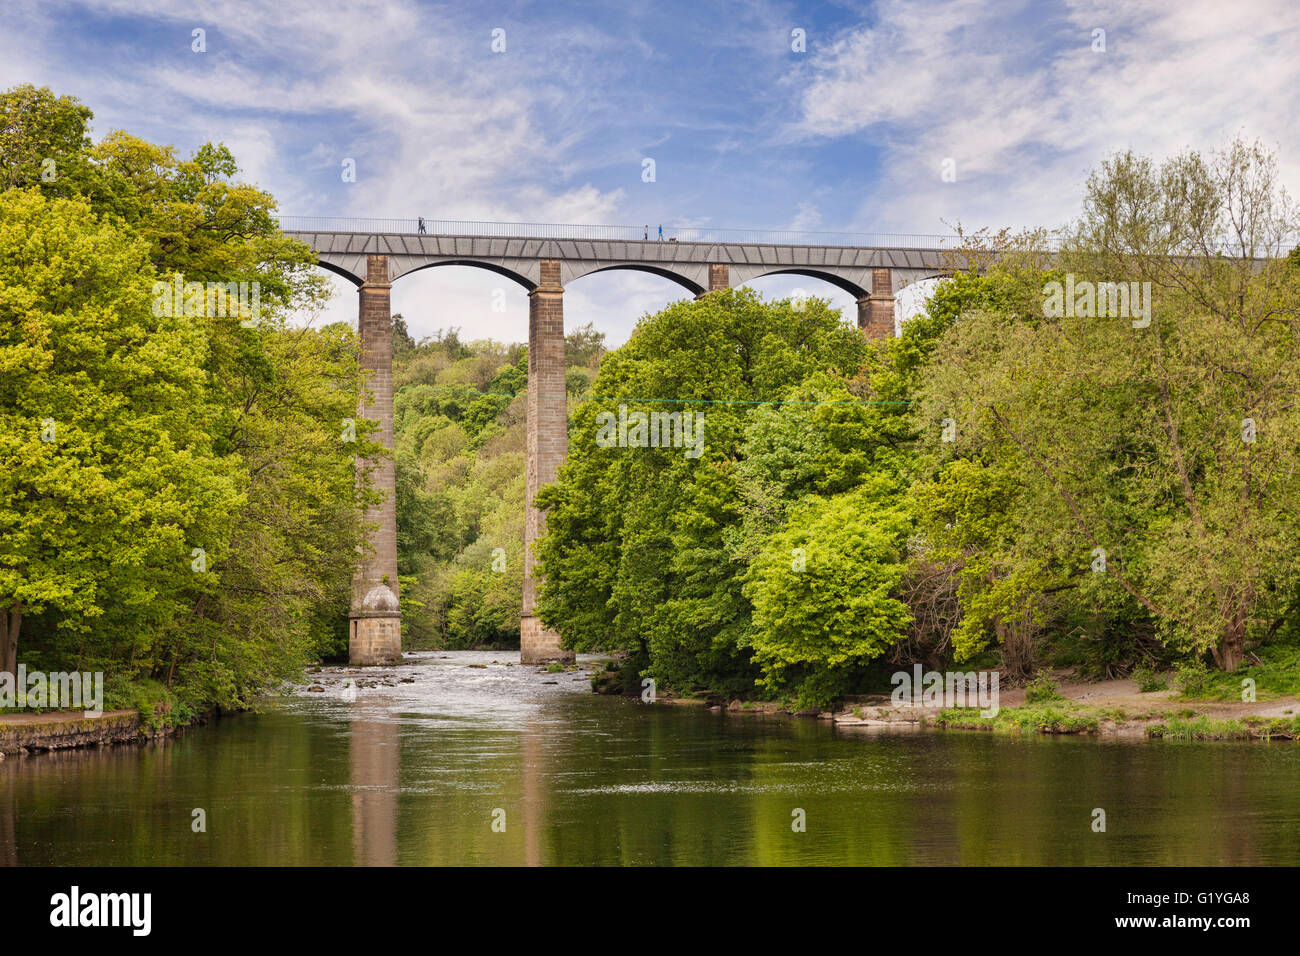 Pontcysyllte Aqueduct, built by Thomas Telford, and a World Heritage Site, reflecting in the River Dee, with people walking... Stock Photo